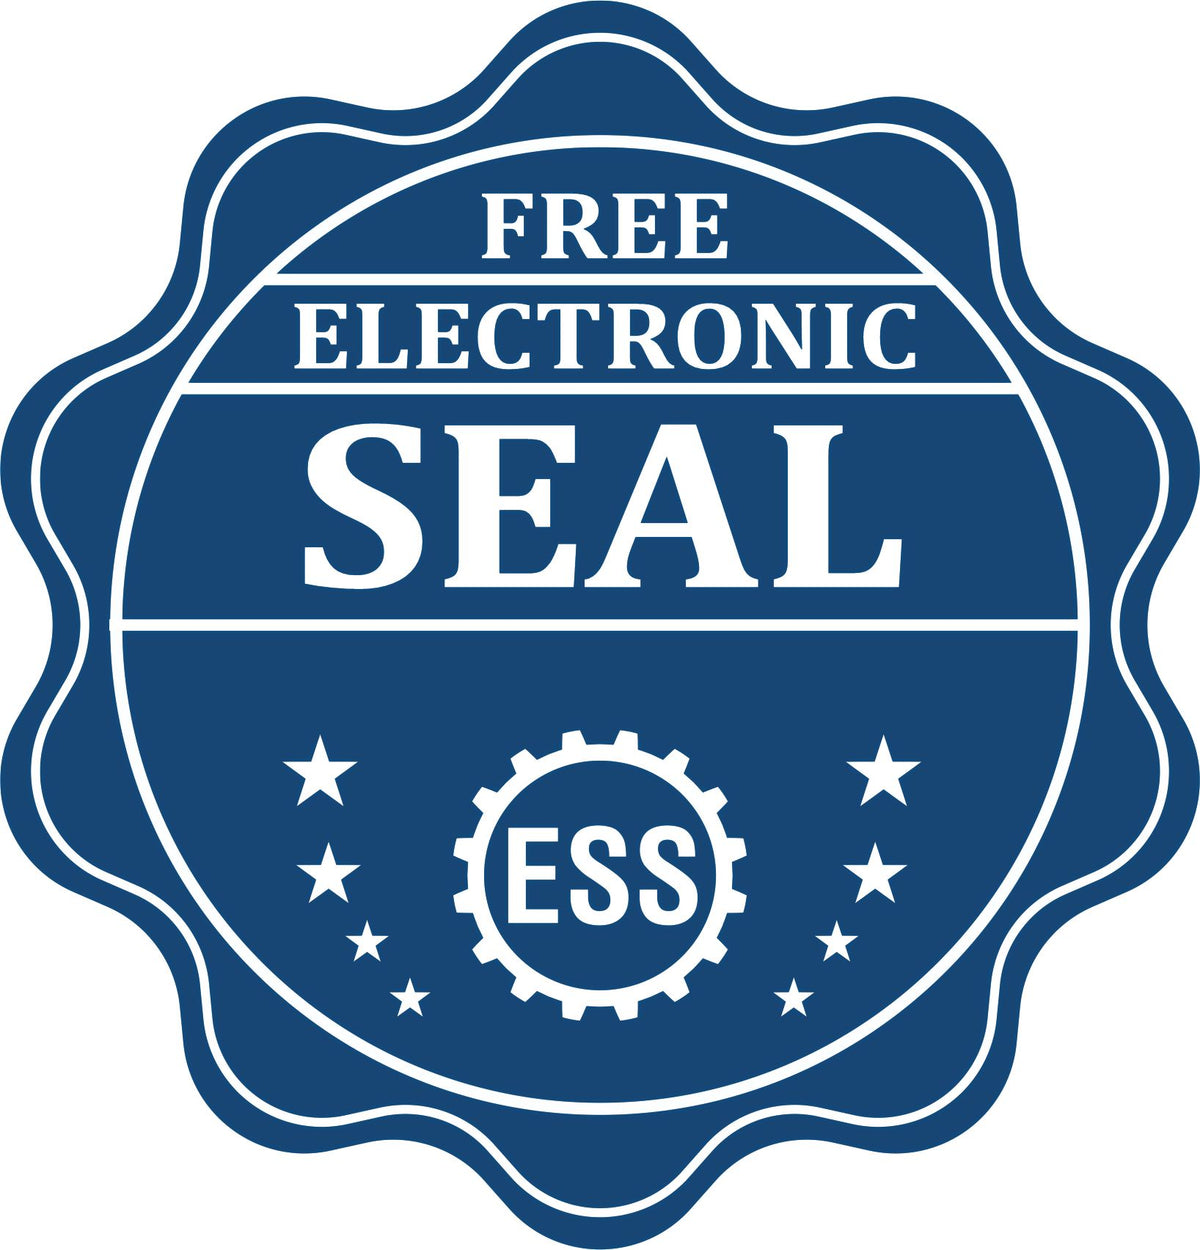 A badge showing a free electronic seal for the MaxLight Premium Pre-Inked New Jersey State Seal Notarial Stamp with stars and the ESS gear on the emblem.